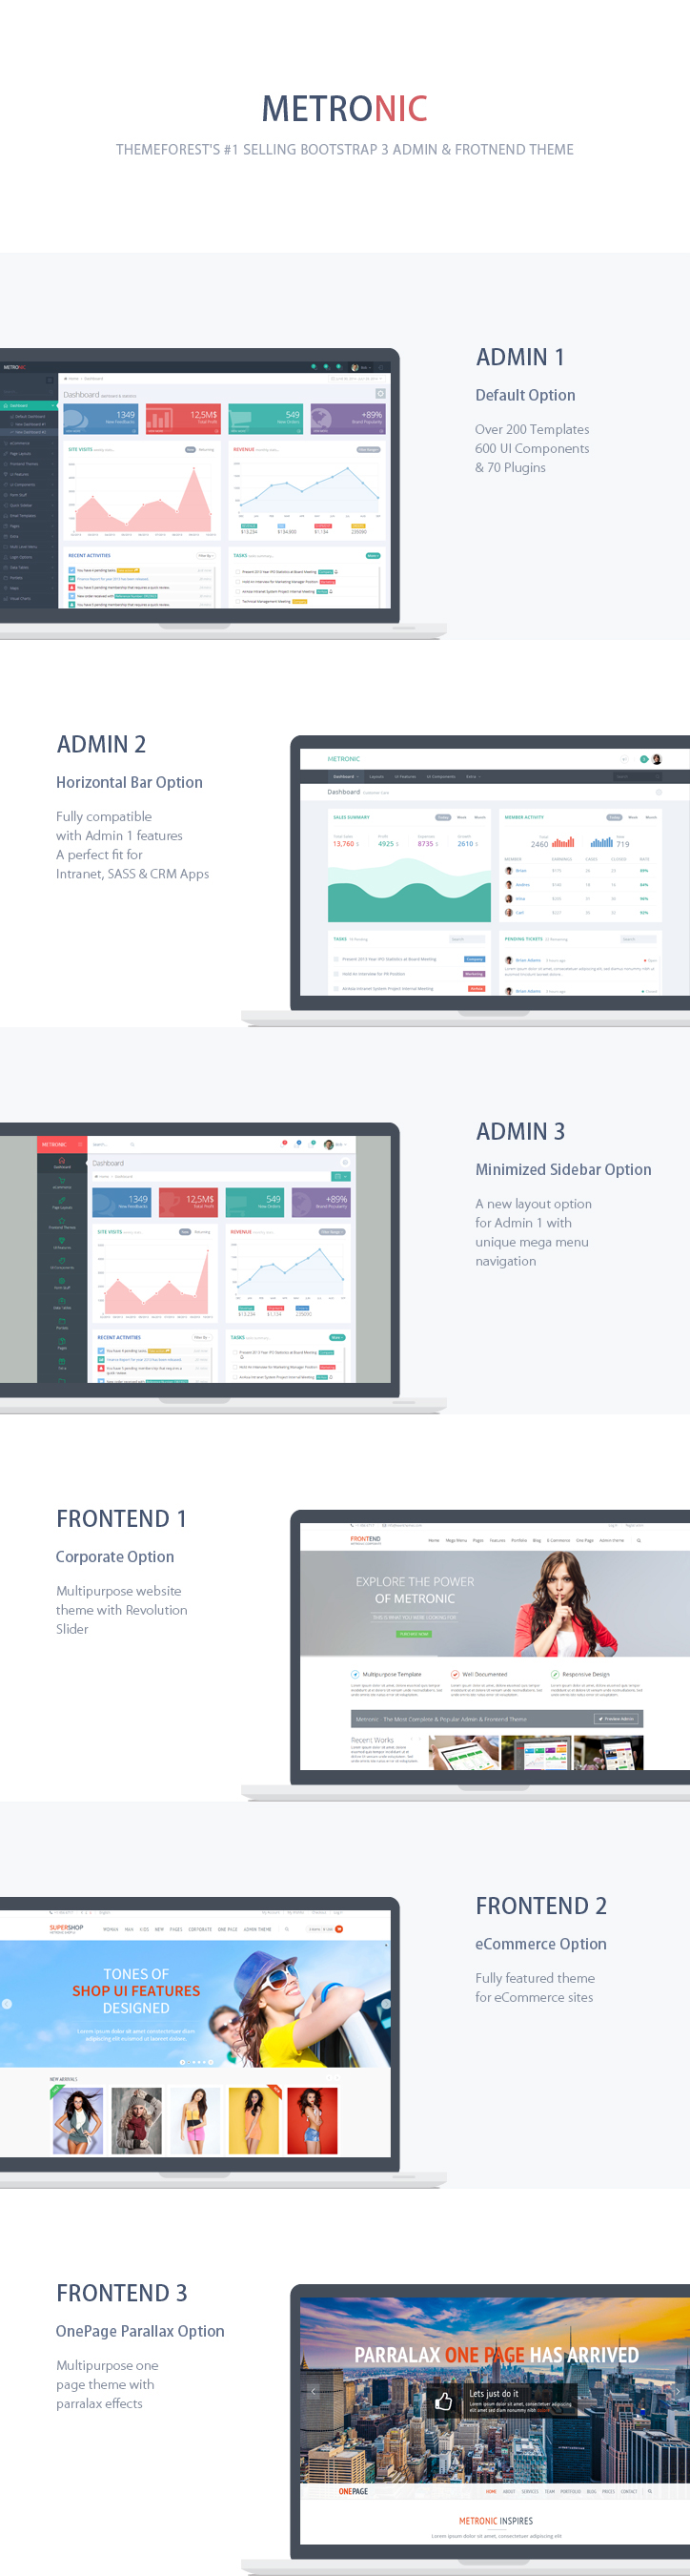 bootstrap admin admin theme Admin dashboard flat reponsive angularjs eCommerce theme Website Theme corporate website One Page parallax Metronic themeforest